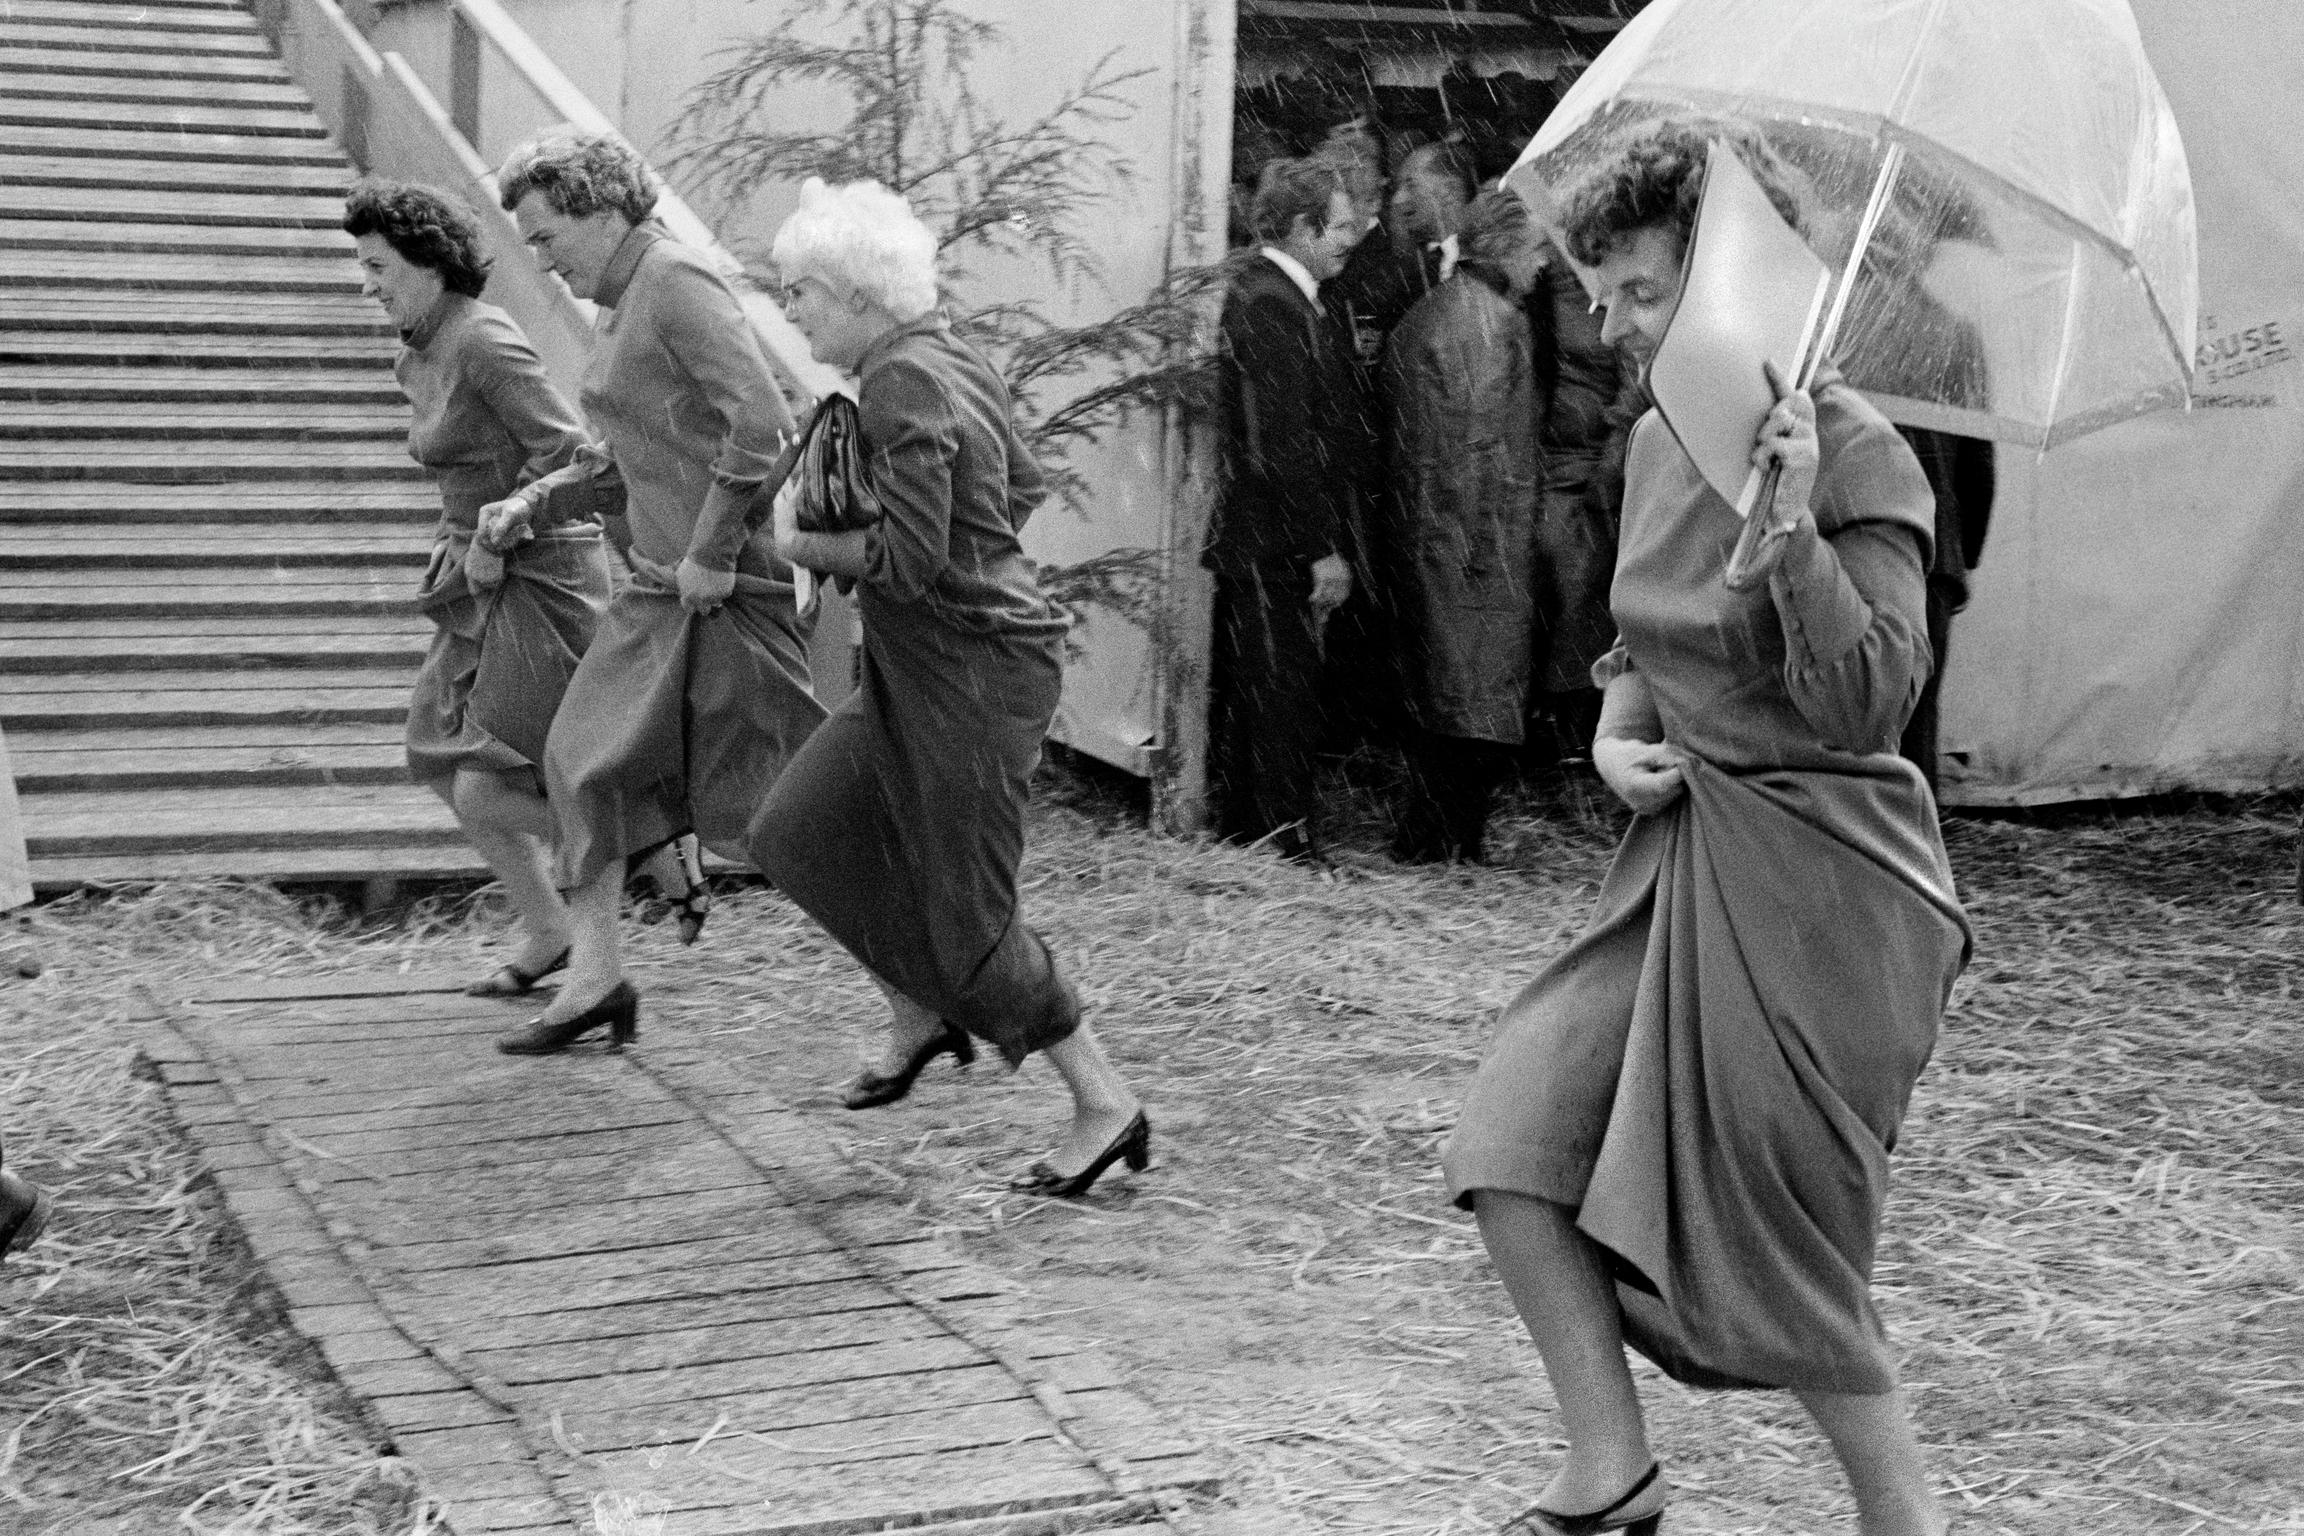 Running in the rain. Competitors in the National Eisteddfod. Ruthin, Wales